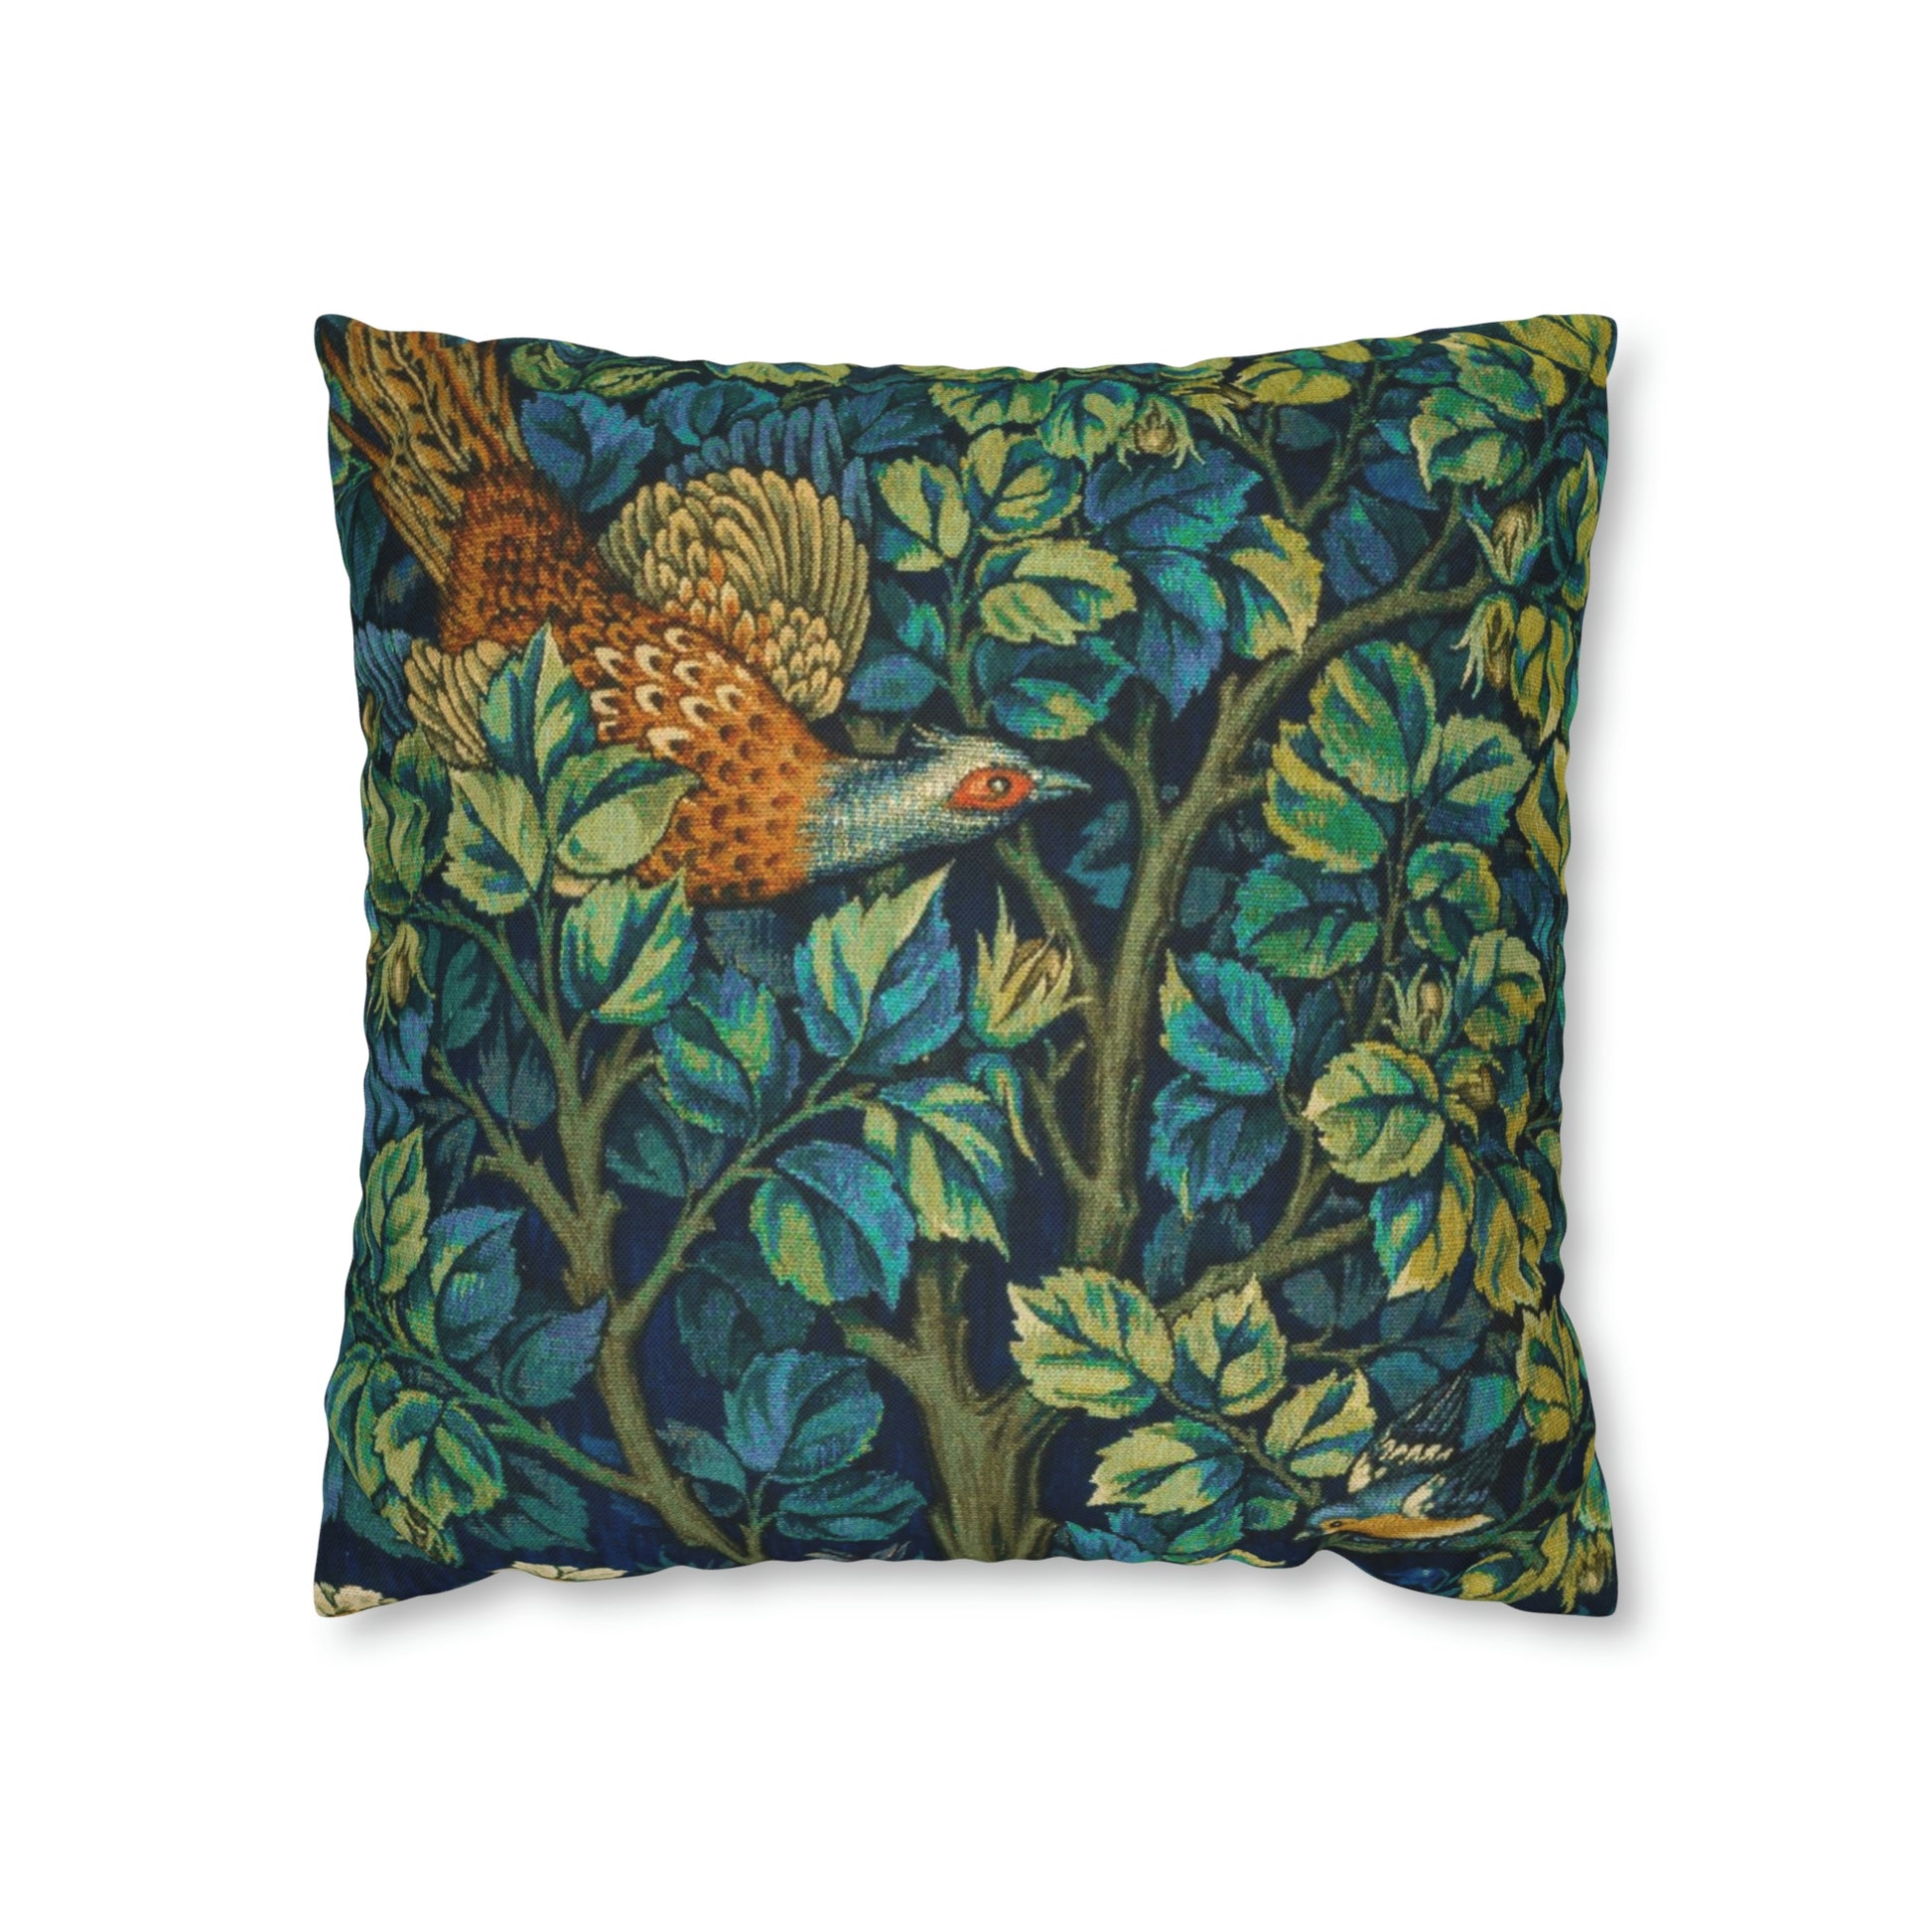 william-morris-co-cushion-cover-pheasant-and-squirrel-collection-pheasant-blue-15